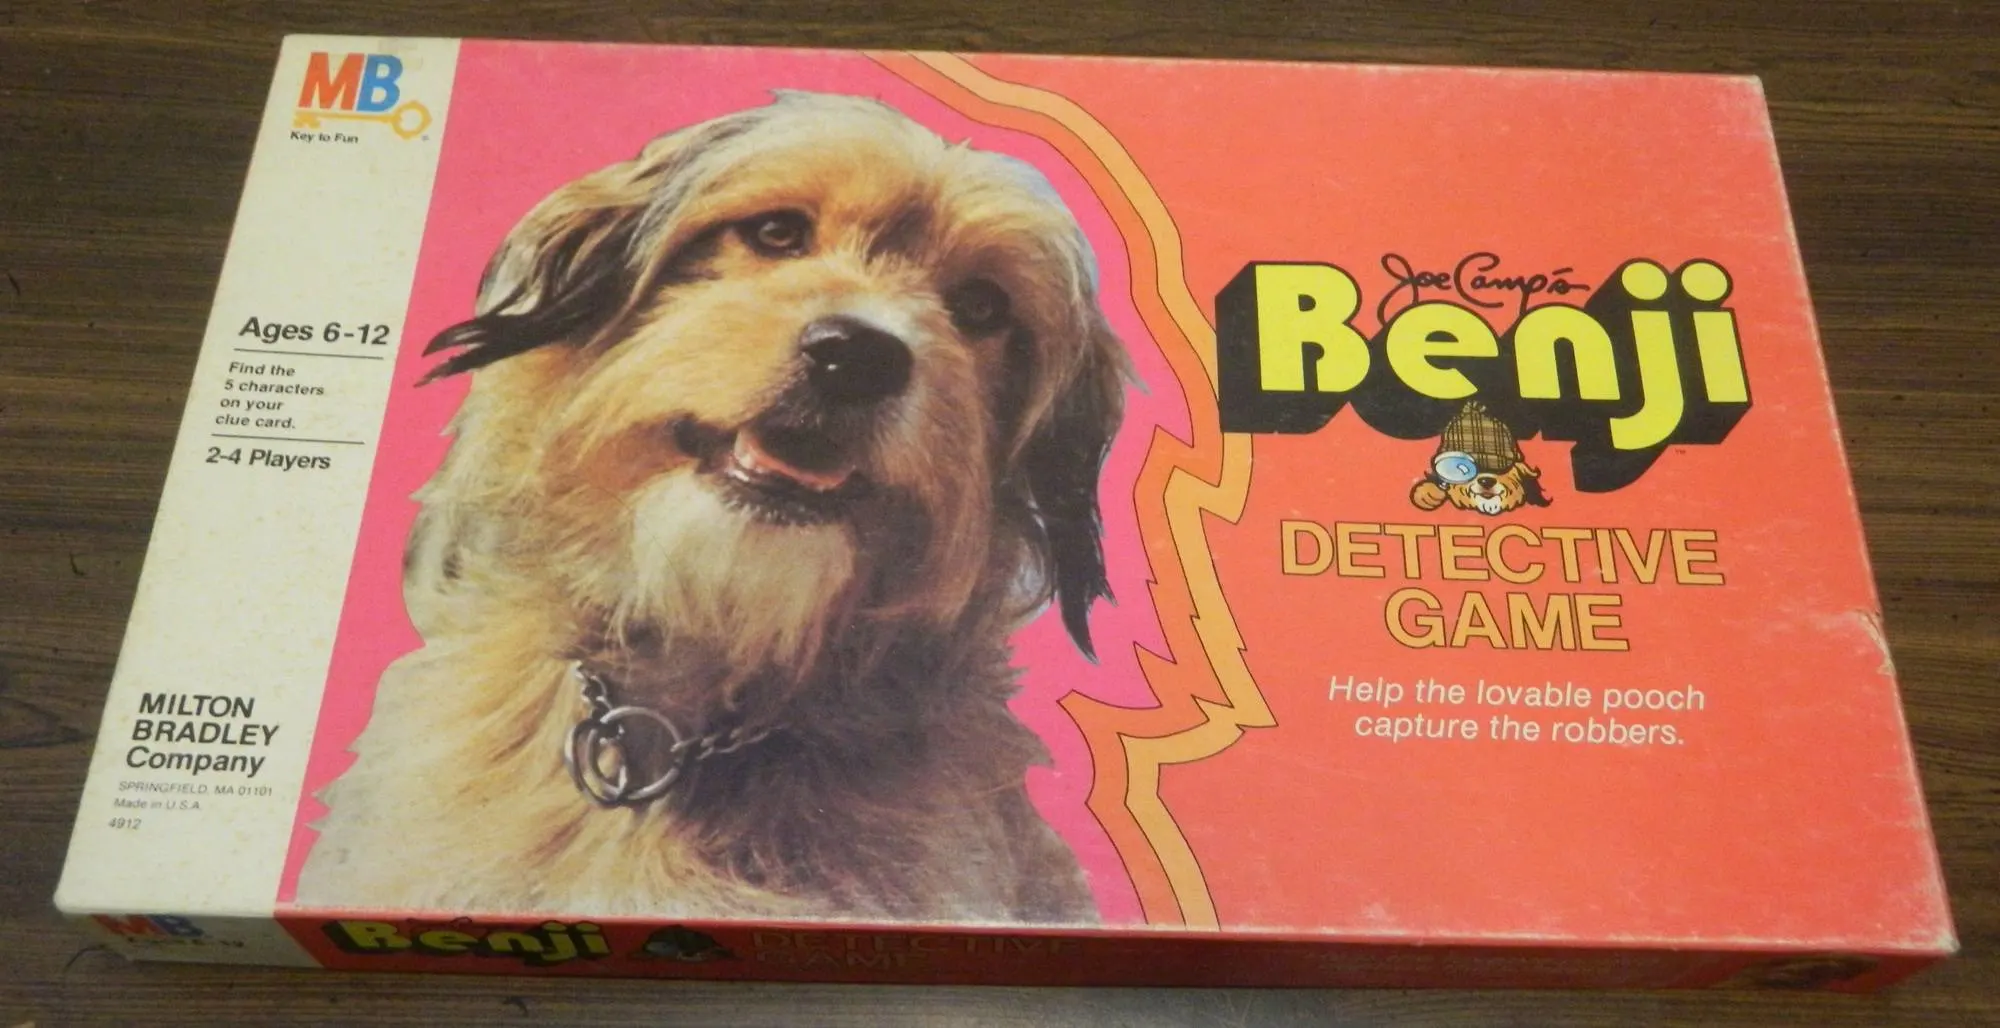 Box for the Benji Detective Game